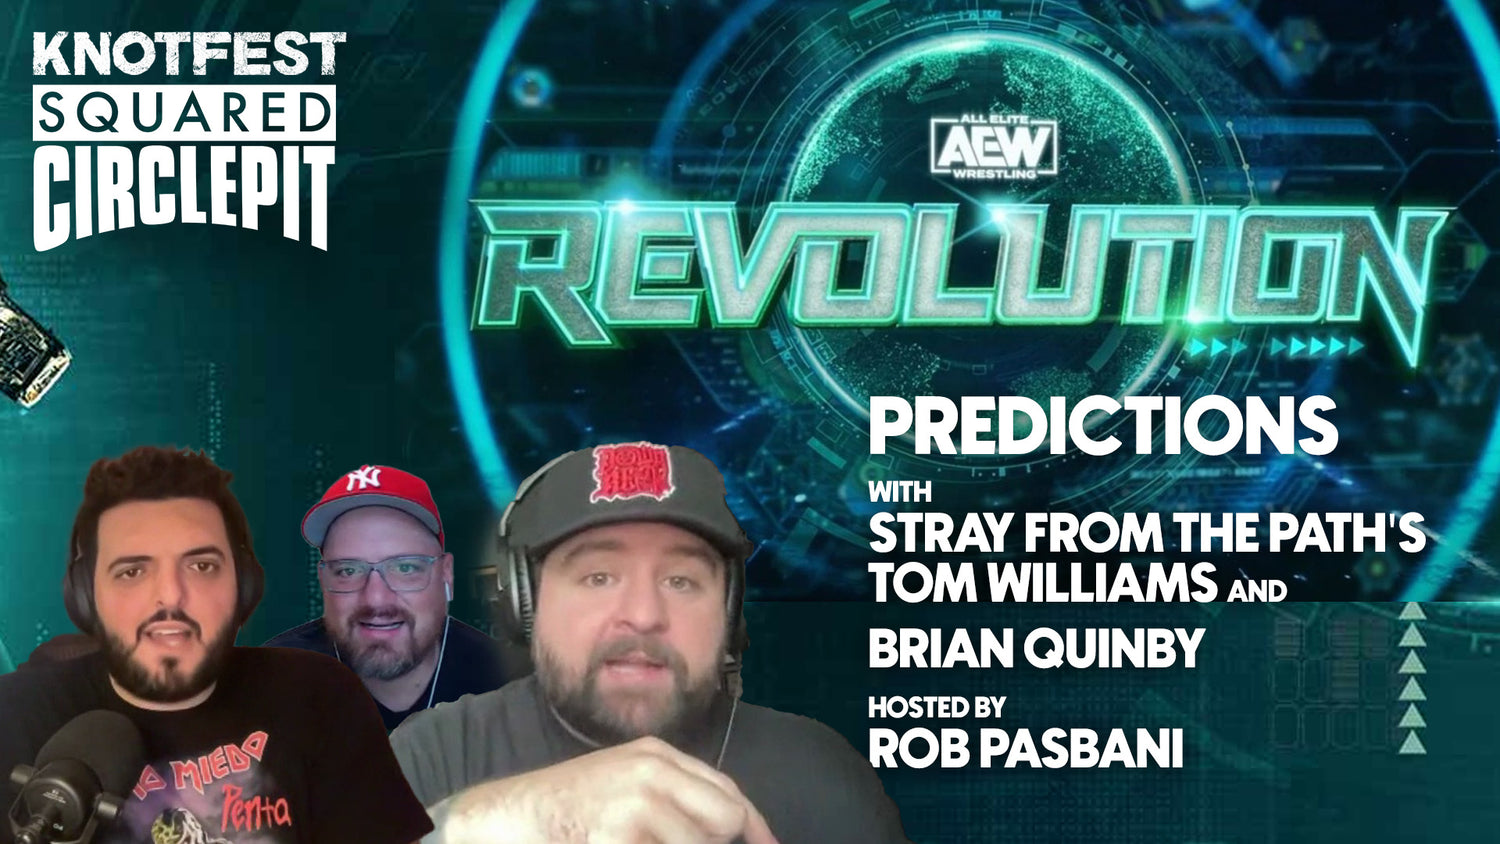 AEW Revolution preview and predictions